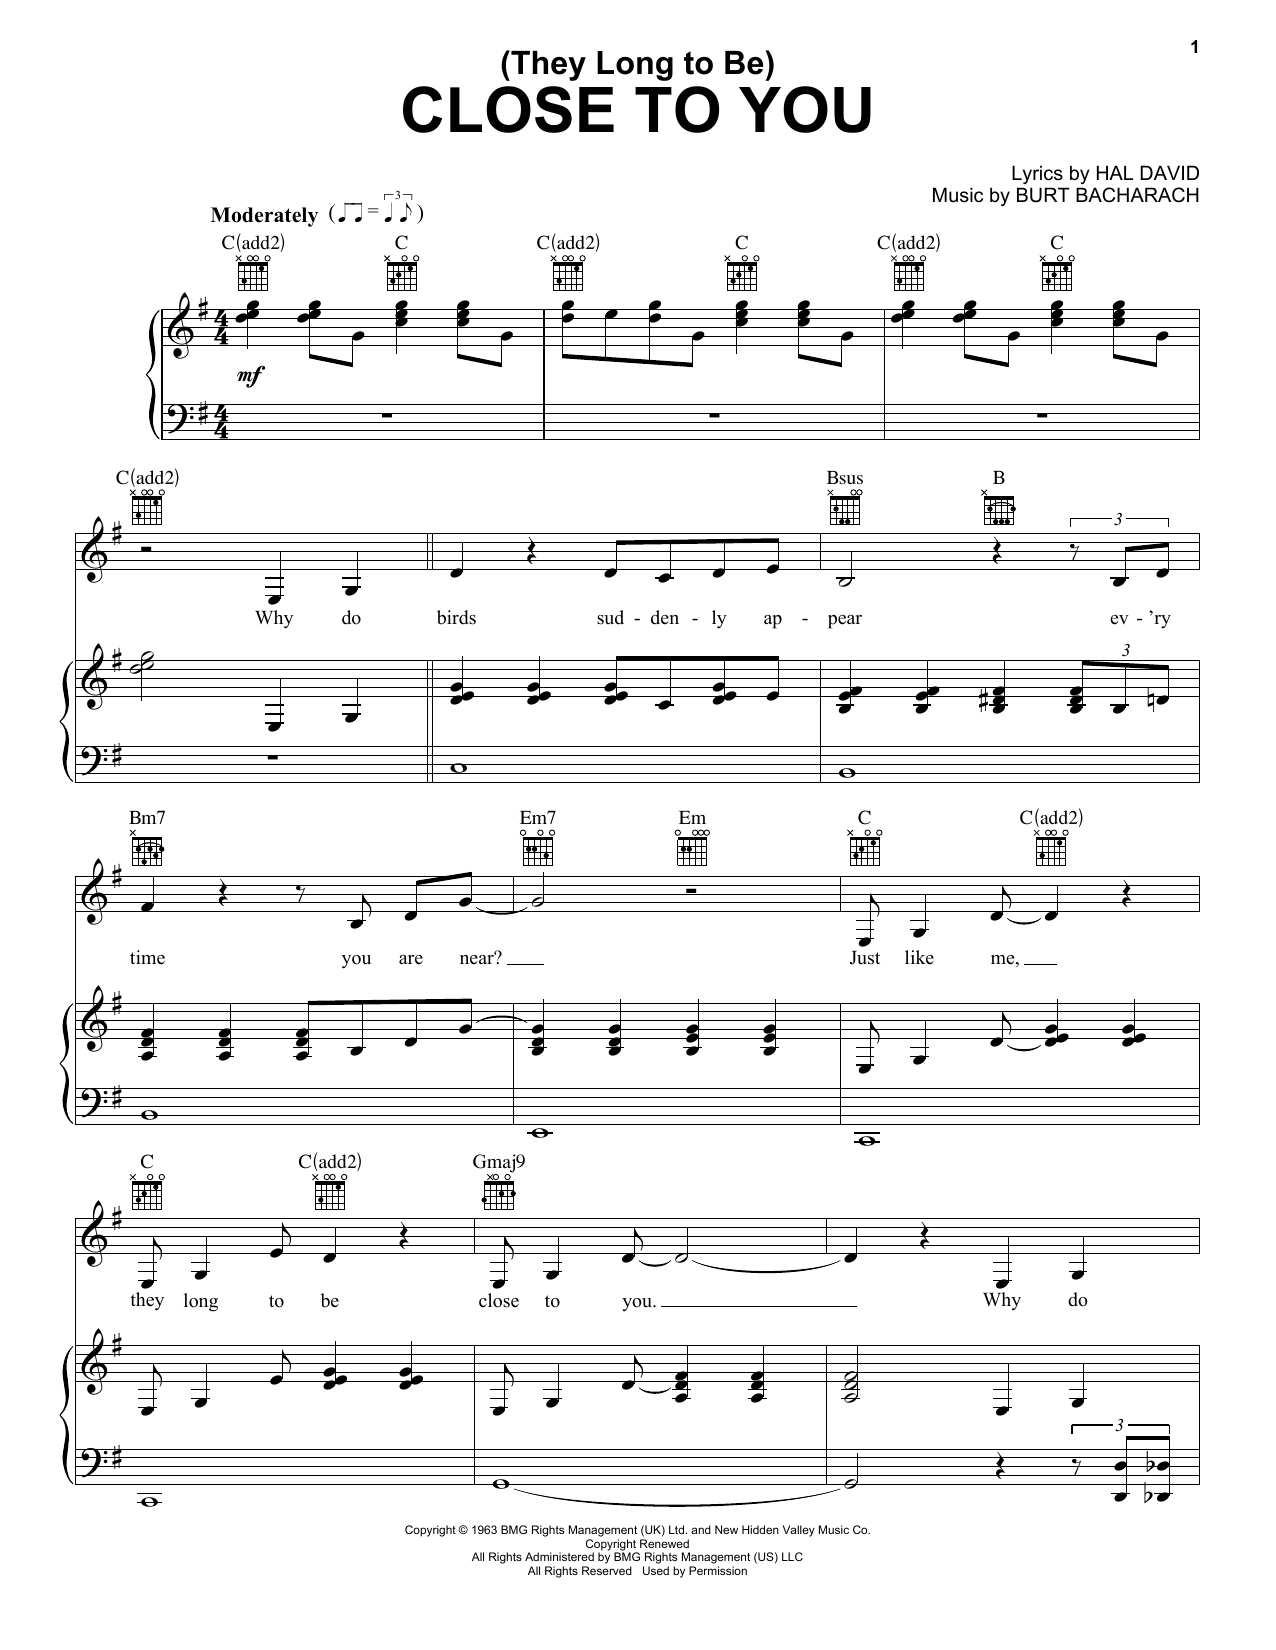 (They Long To Be) Close To You sheet music